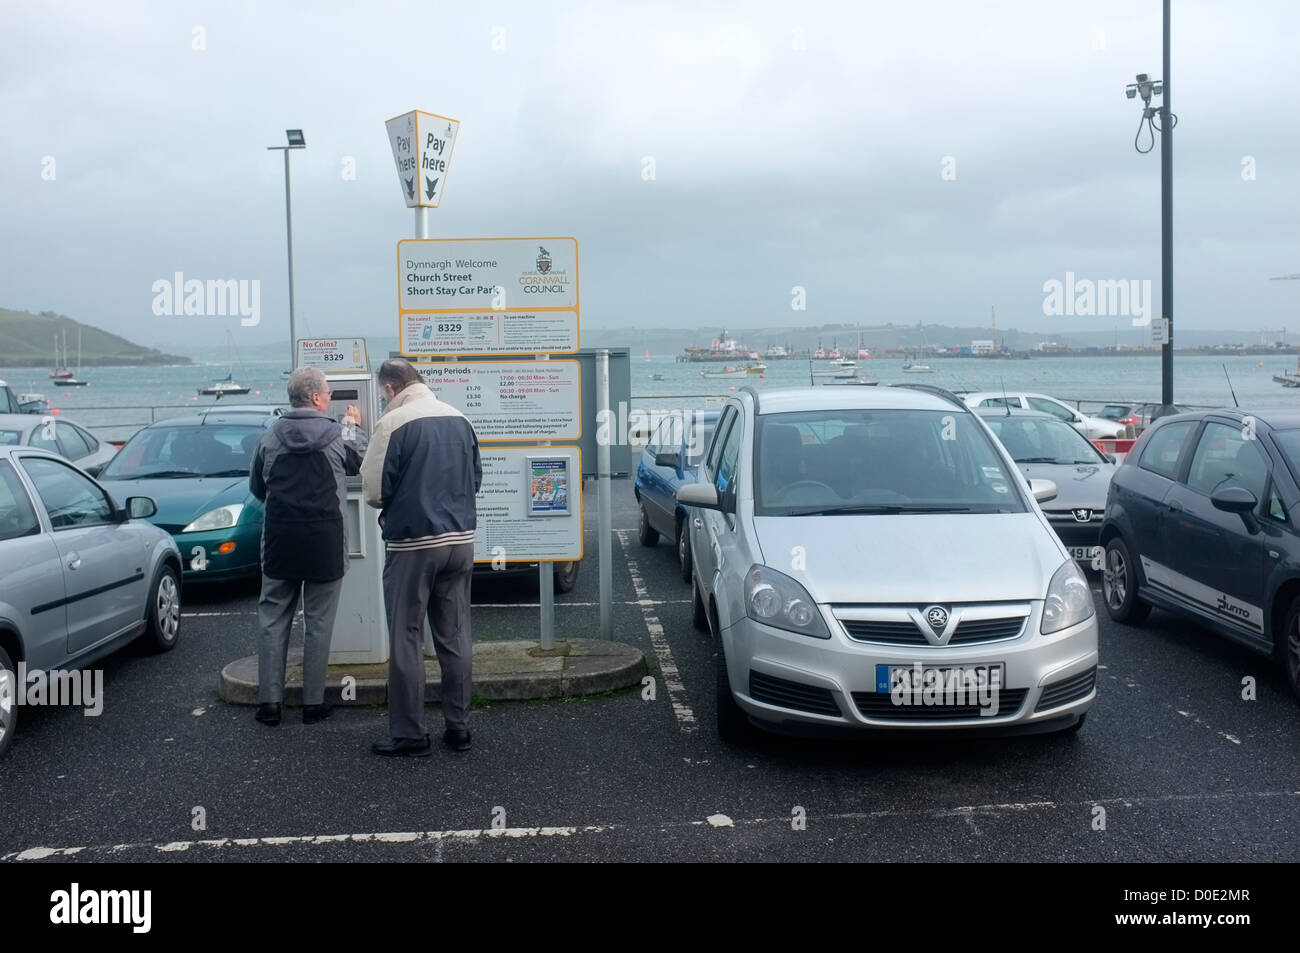 Two men buy parking tickets in Church street car park in Falmouth, Cornwall, UK Stock Photo